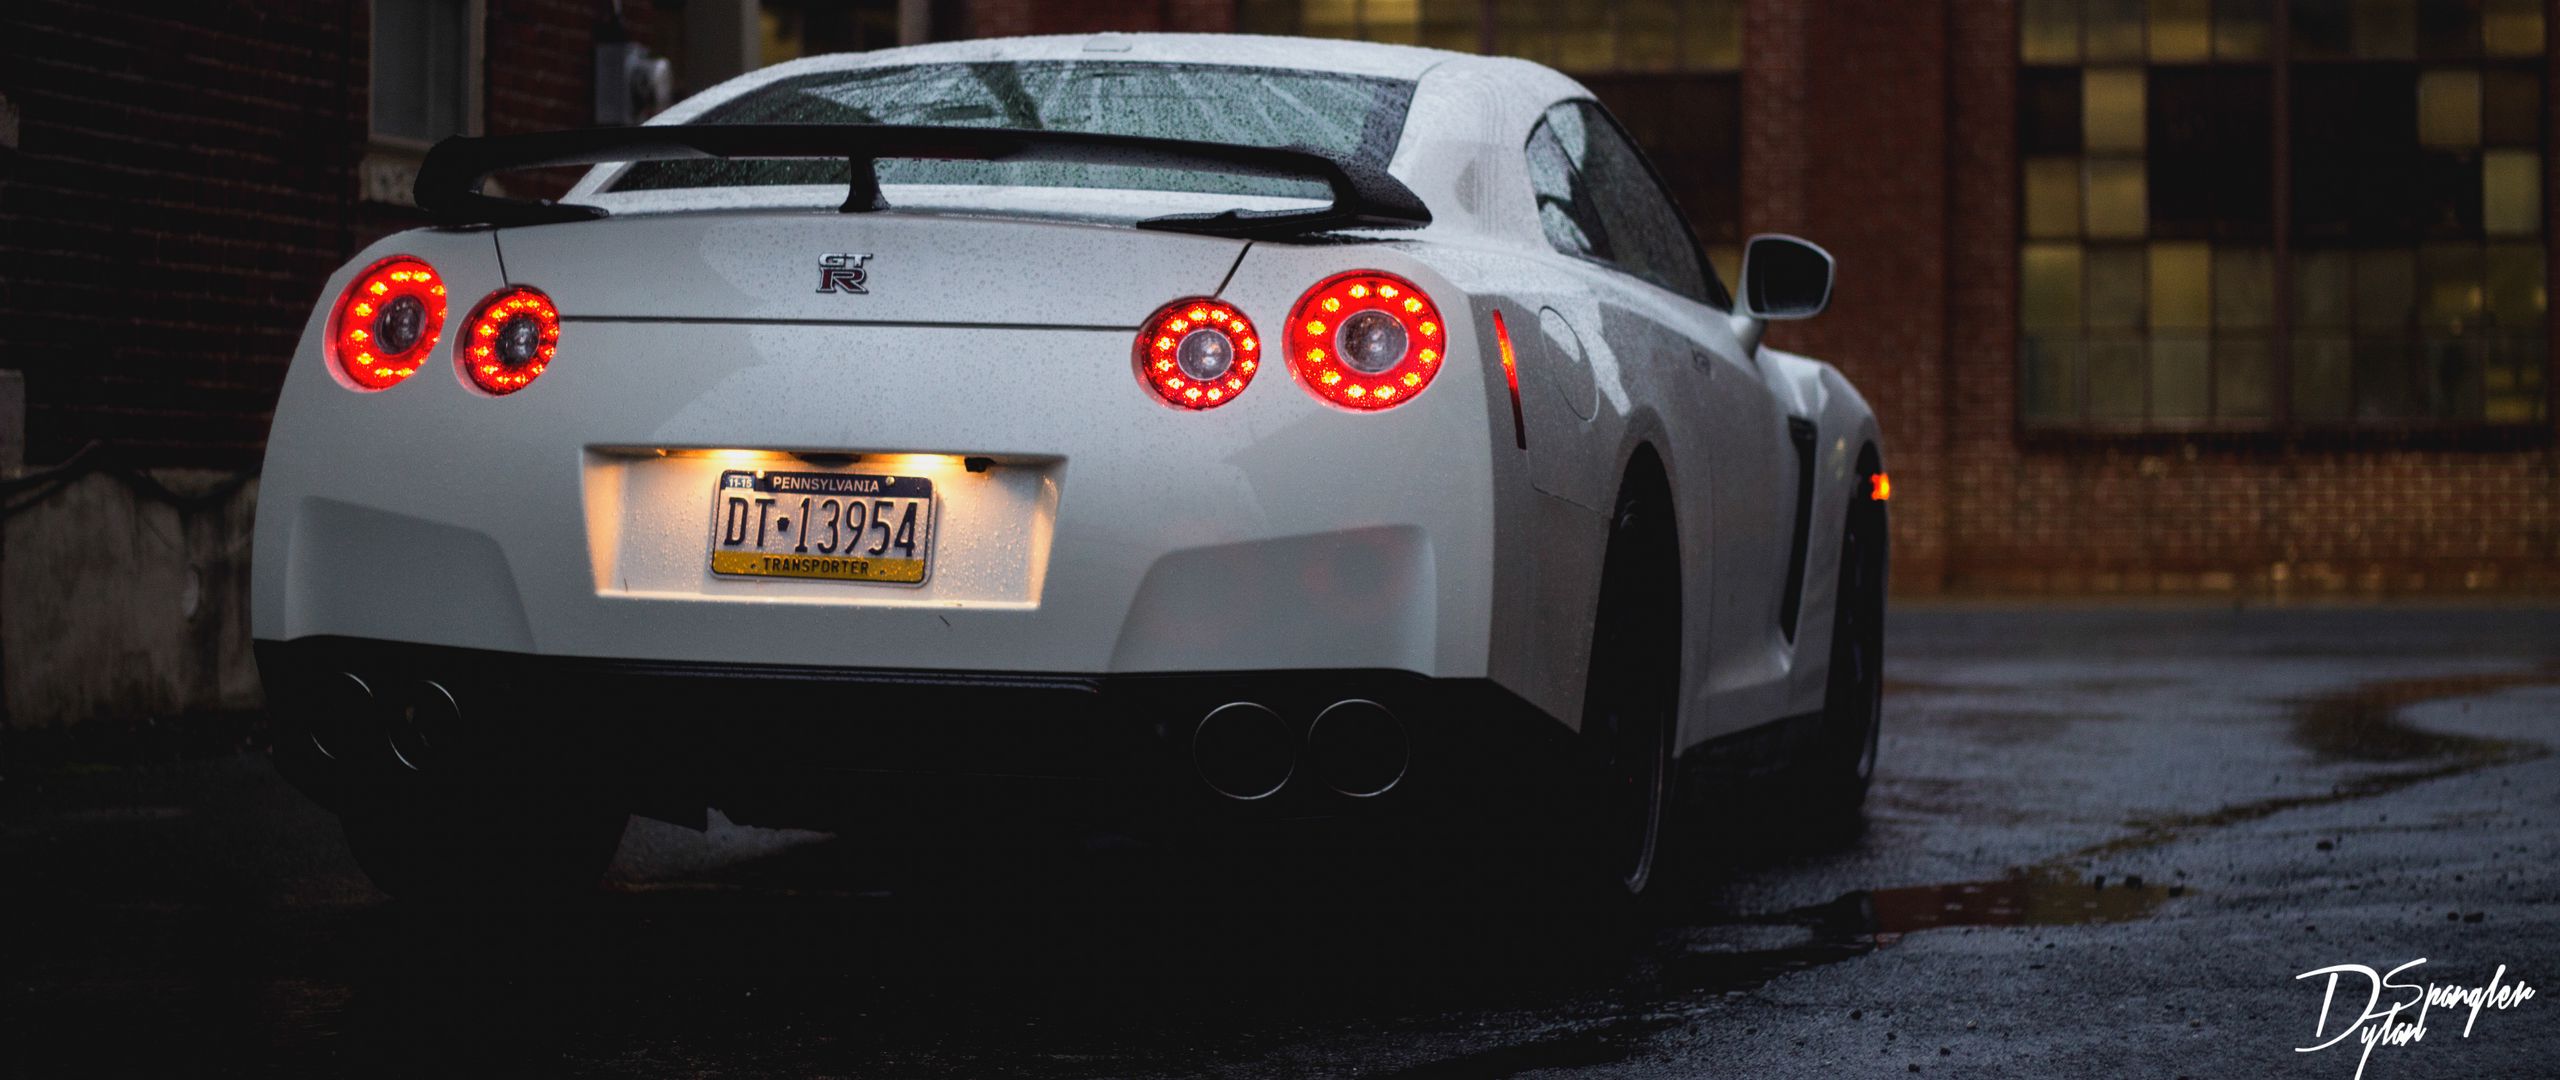 Download wallpaper 2560x1080 nissan, gtr, supercar, turbo dual wide 1080p  hd background